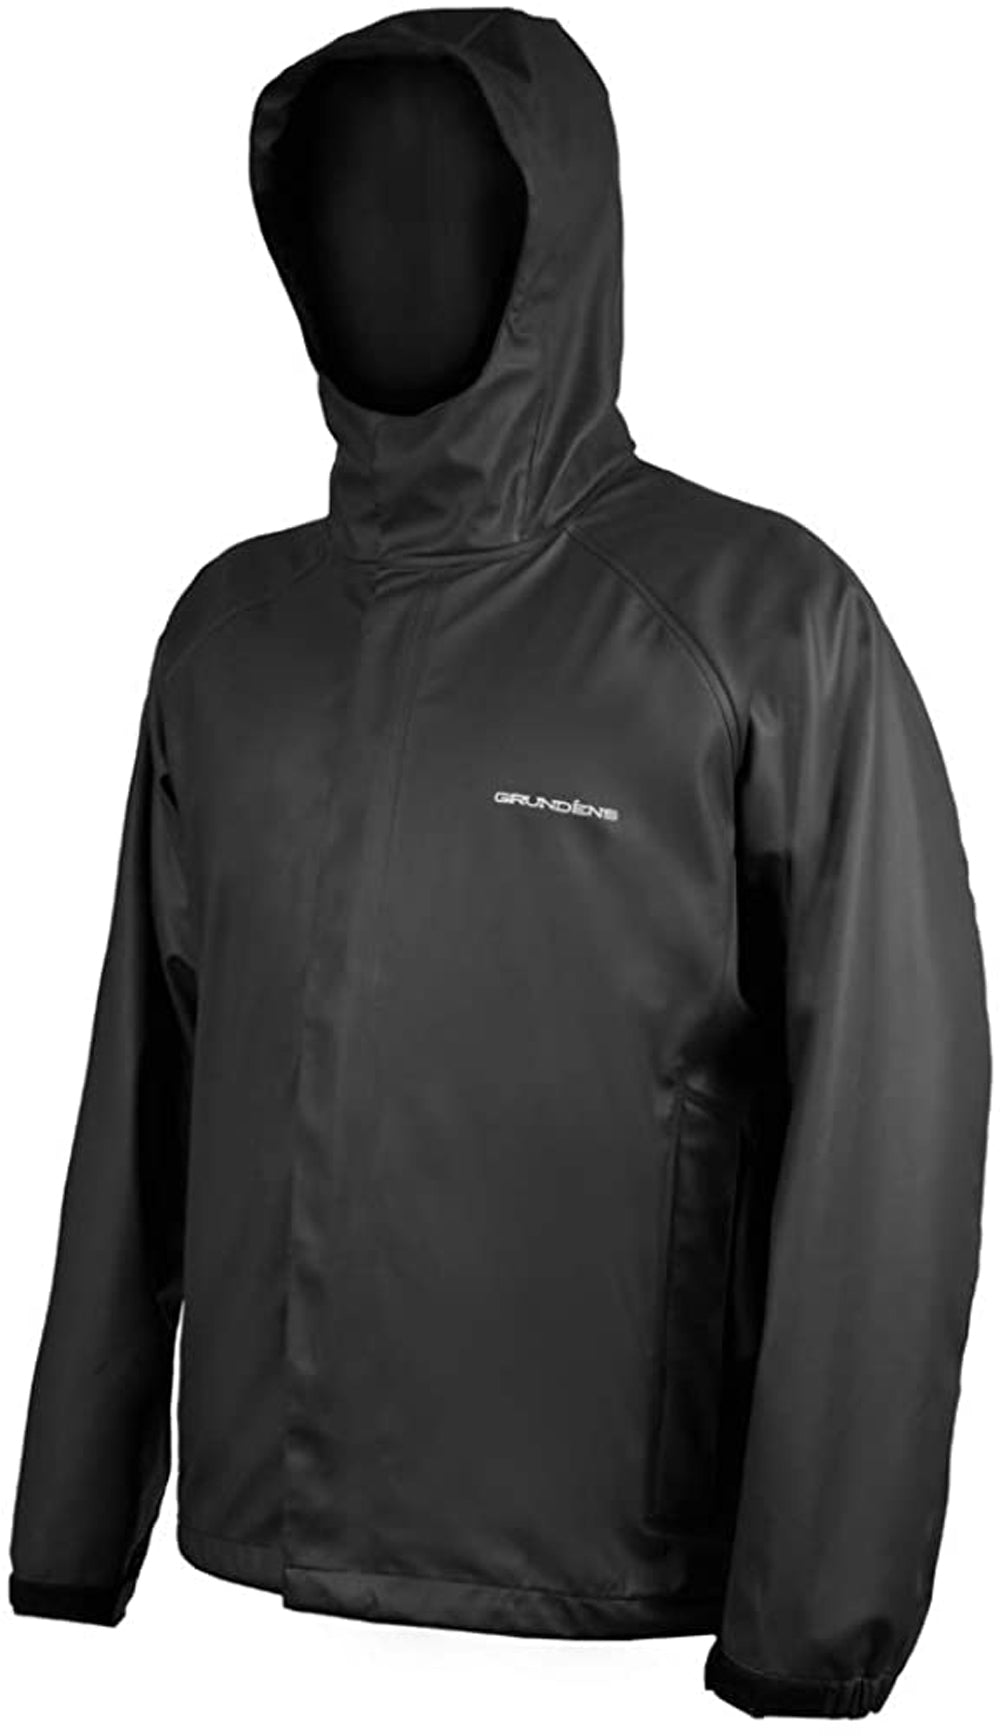 Neptune Jacket in Black color from the front view